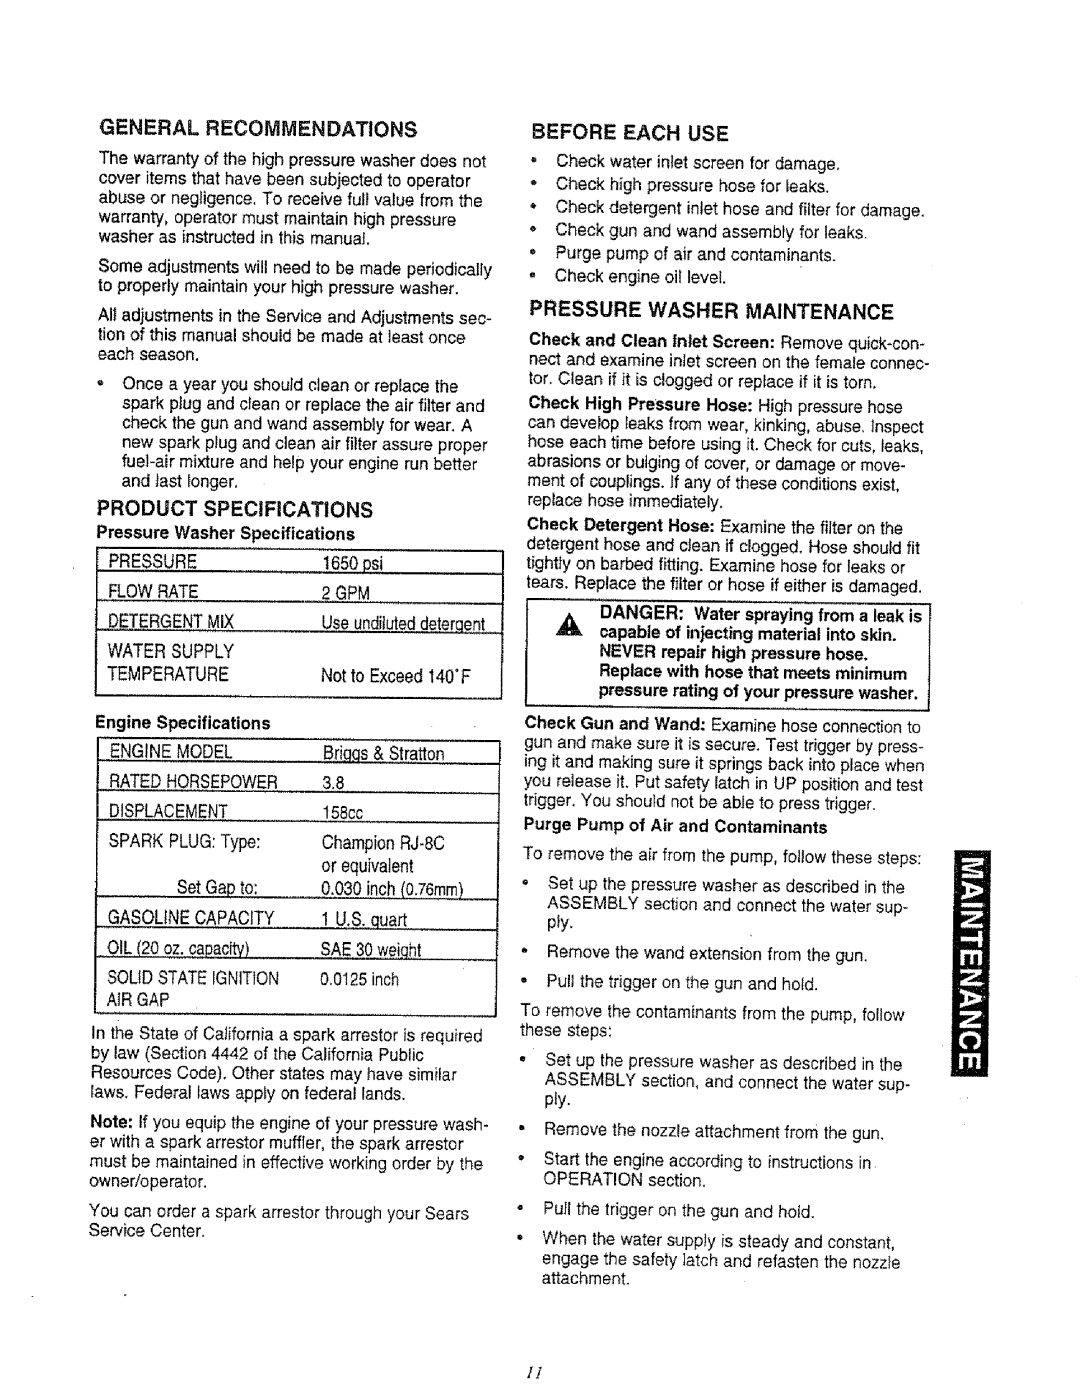 Sears 580.761652 manual General Recommendations, Before Each Use, Product Specifications, Pressure Washer Maintenance 